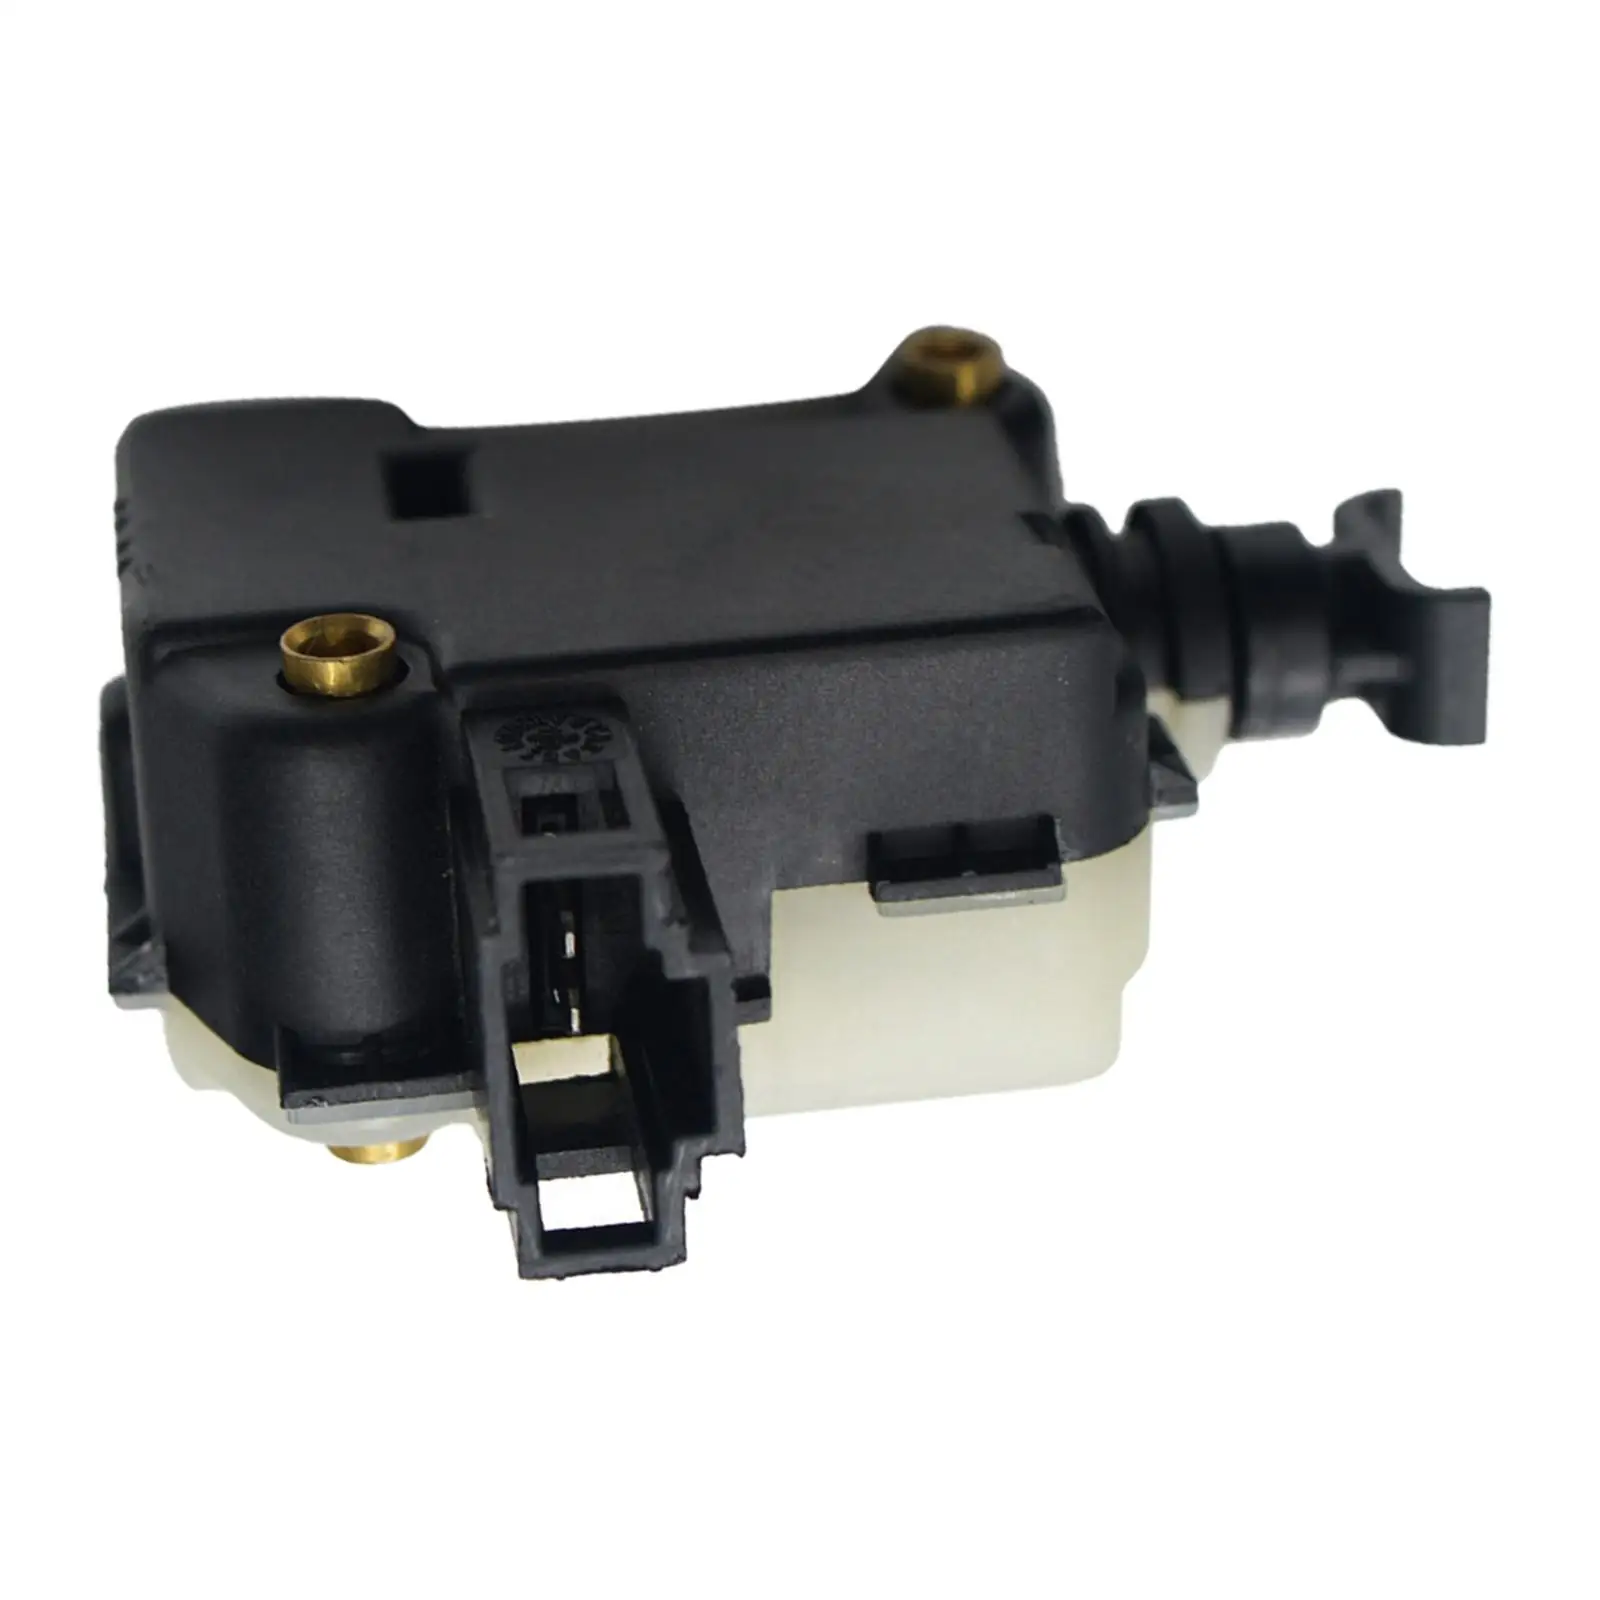 3B5827061B Trunk Tailgate Lock Motor 3B0959781C for 2003-2010 Automotive Accessory Spare Parts Replaces